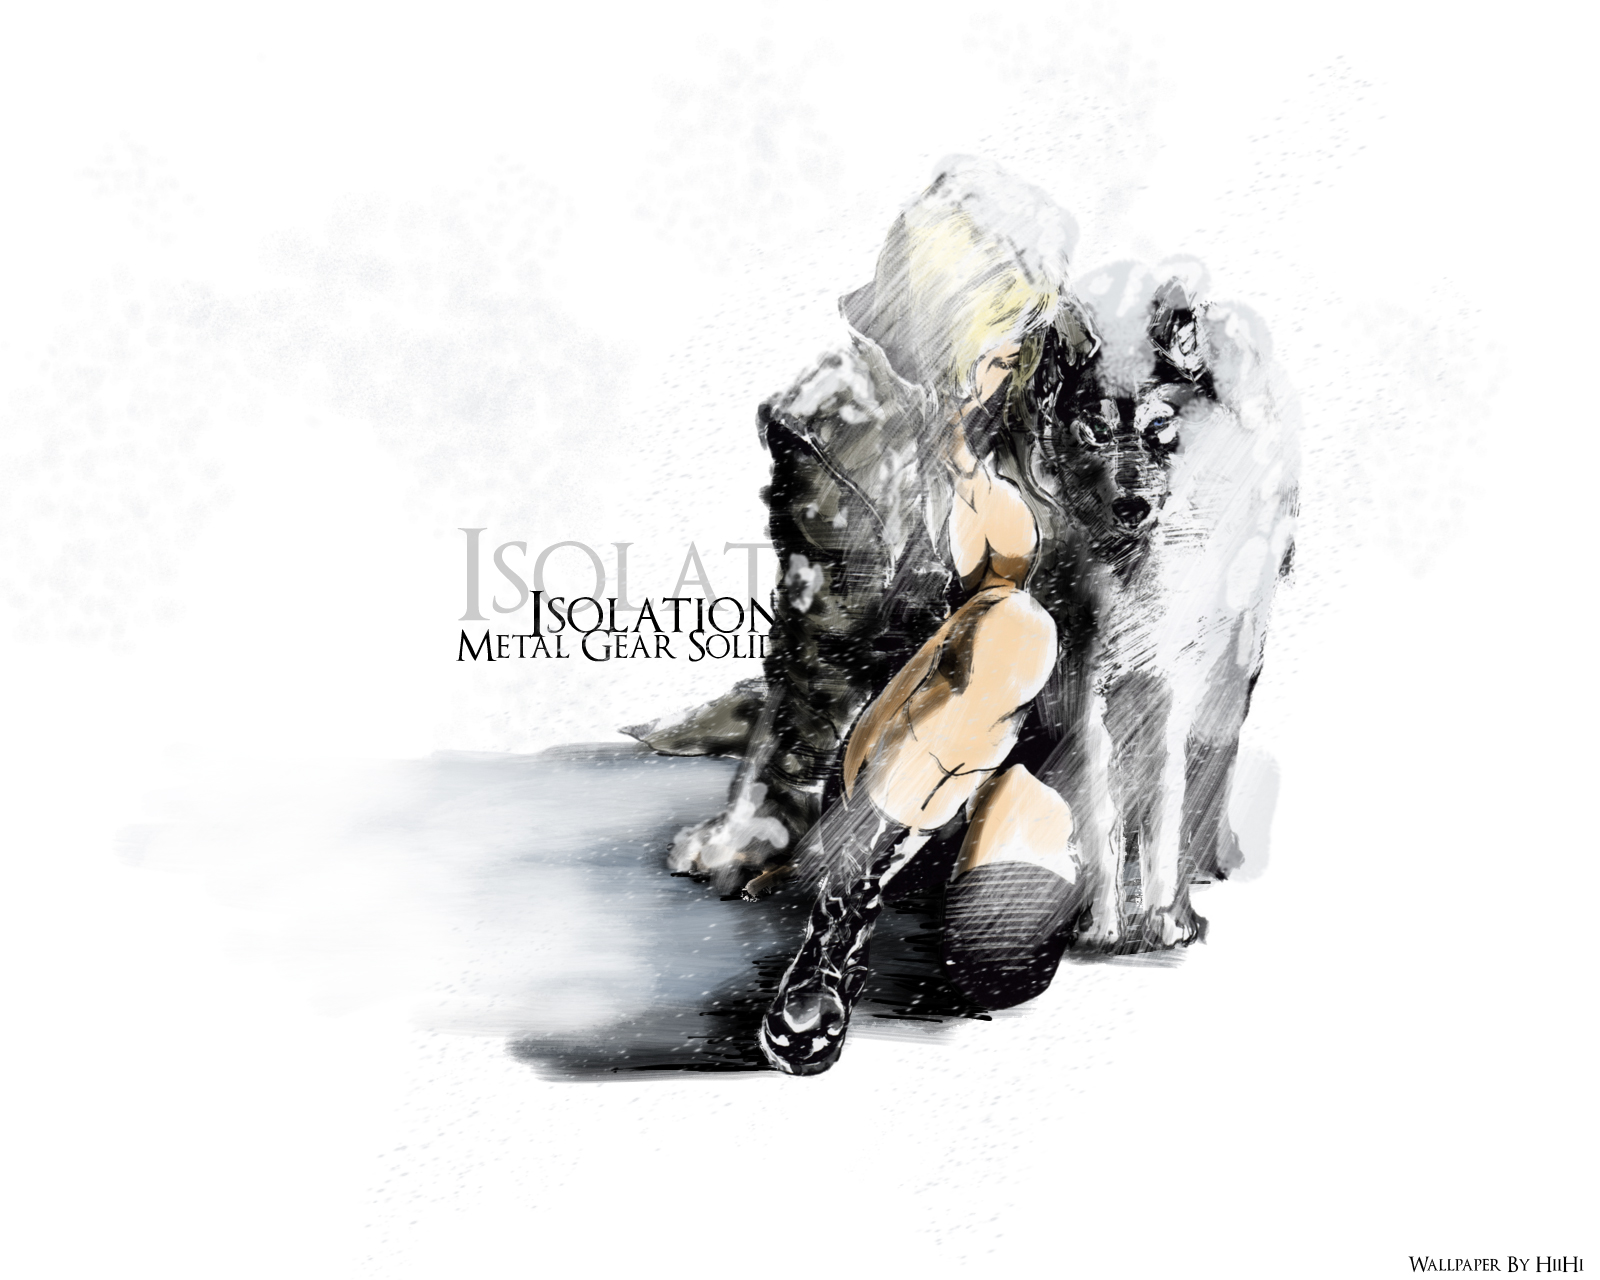 mgs metal gear solid isolation artwork game girl dog #x0q